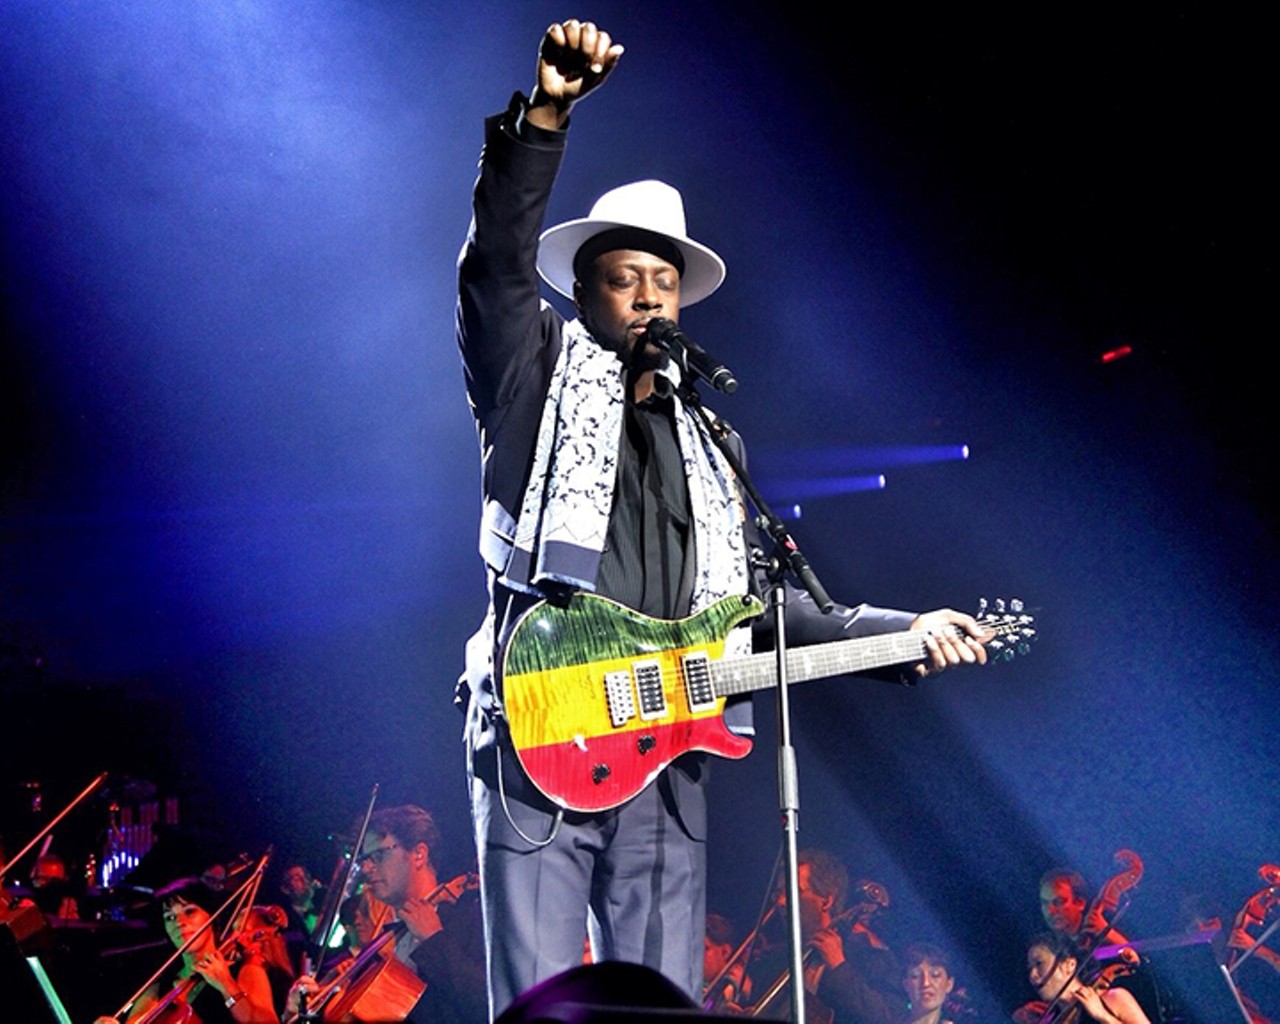 Saturday, March 17Orlando Caribbean Festival with Wyclef Jean at Orlando AmphitheaterPhoto by Luc de Wandel